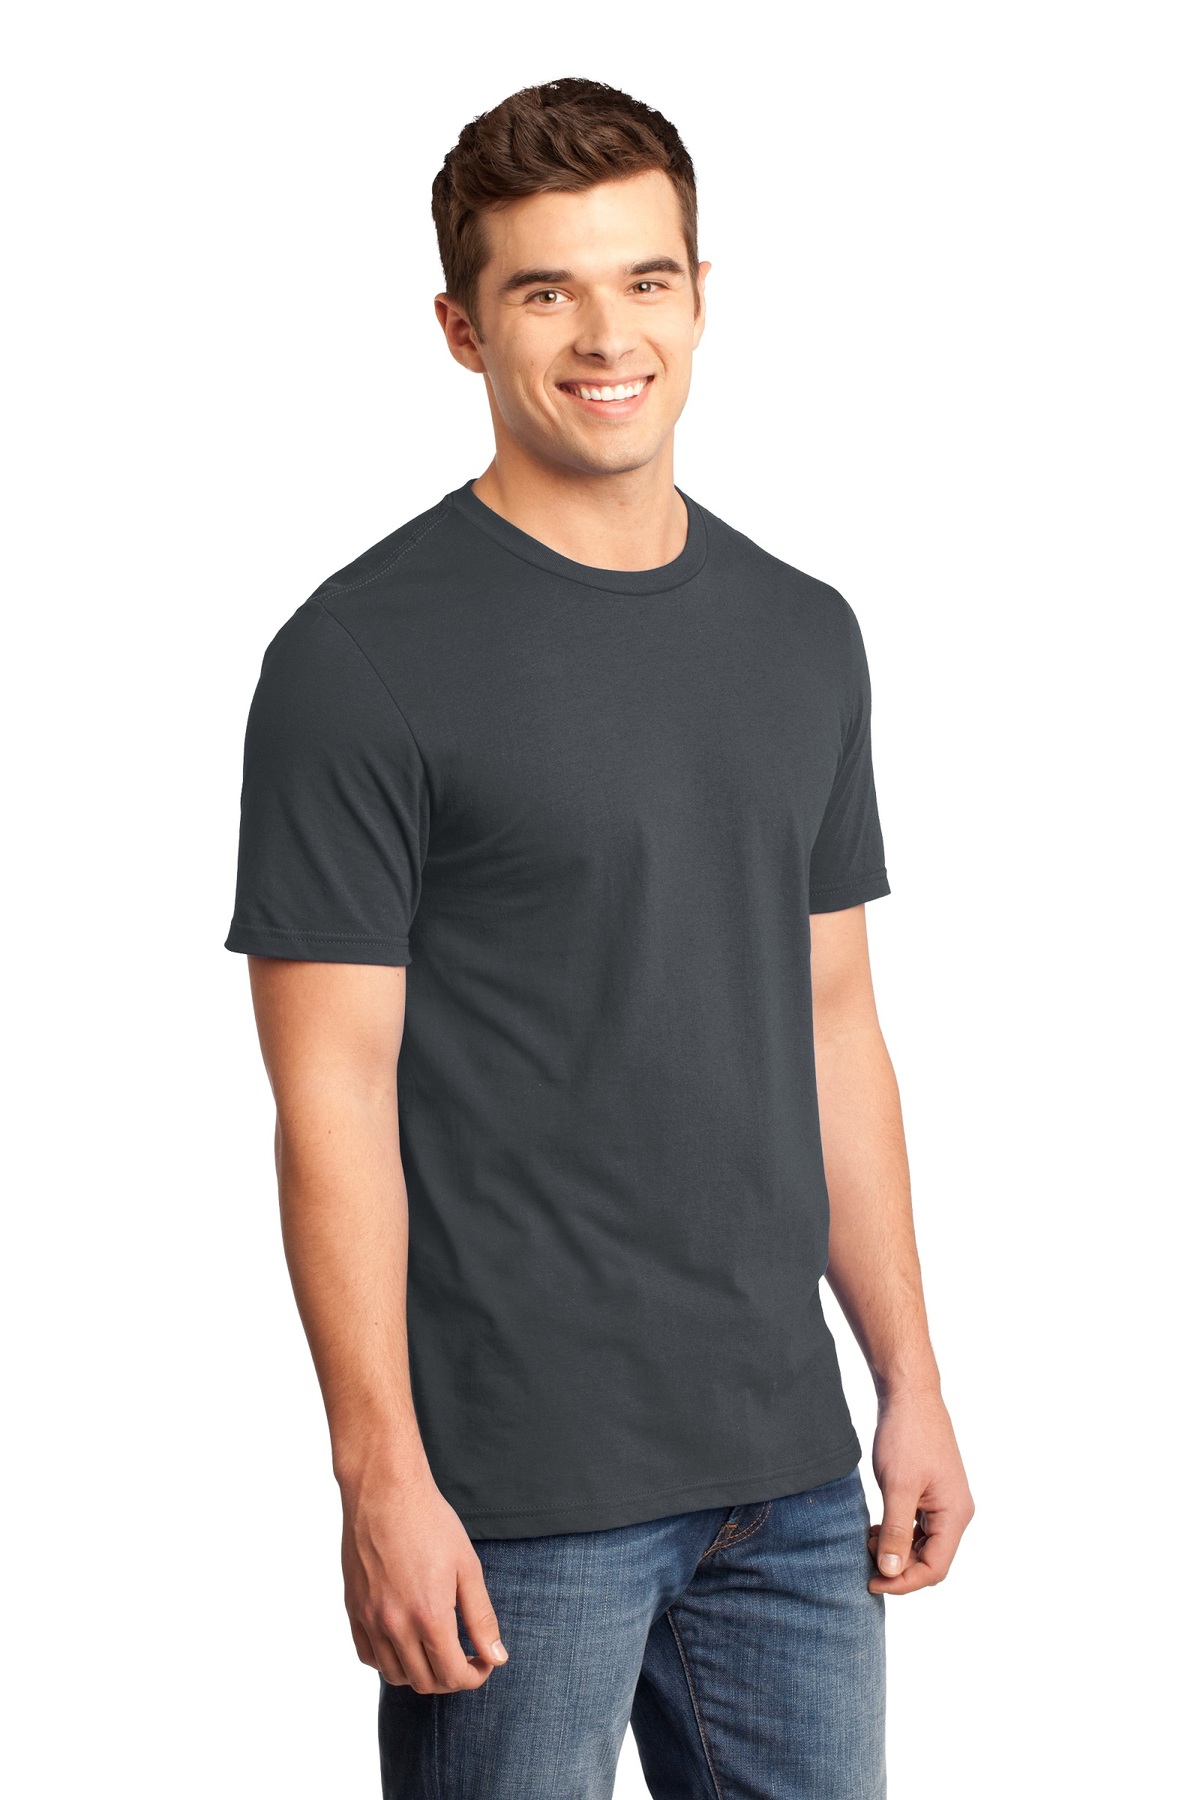 District Embroidered Men's Very Important Tee | T-Shirts - Queensboro